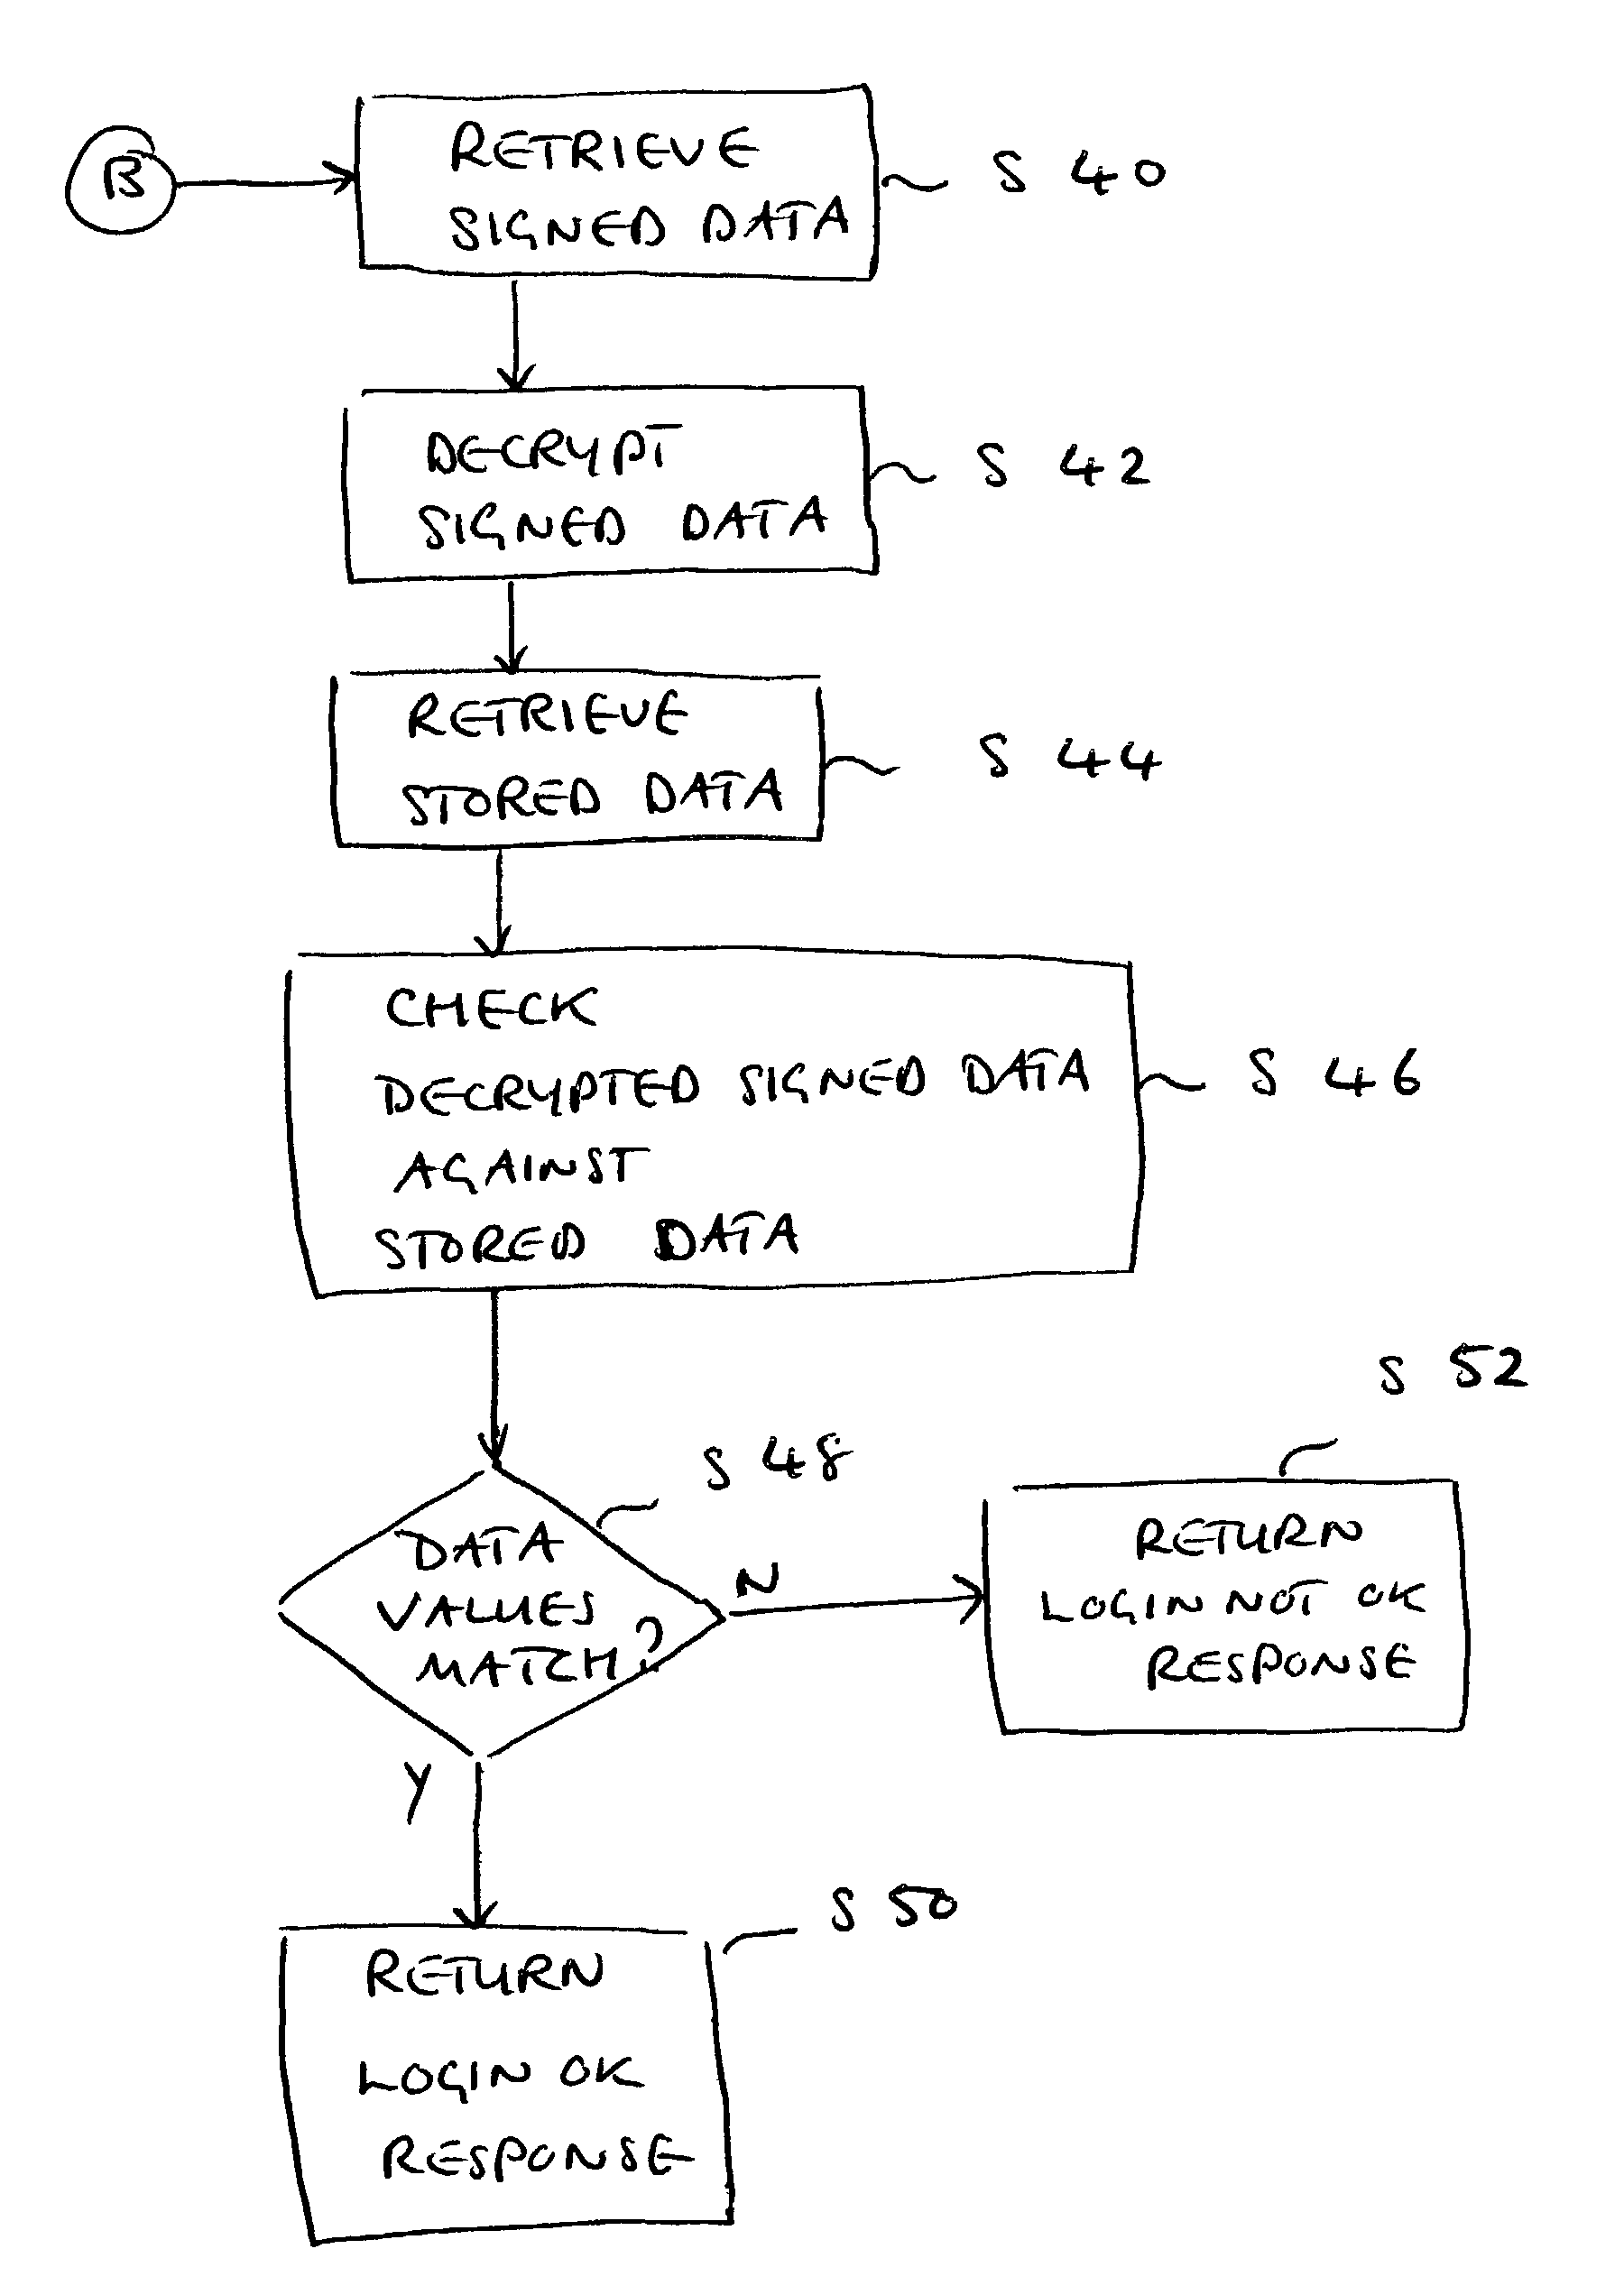 Network message generation for automated authentication